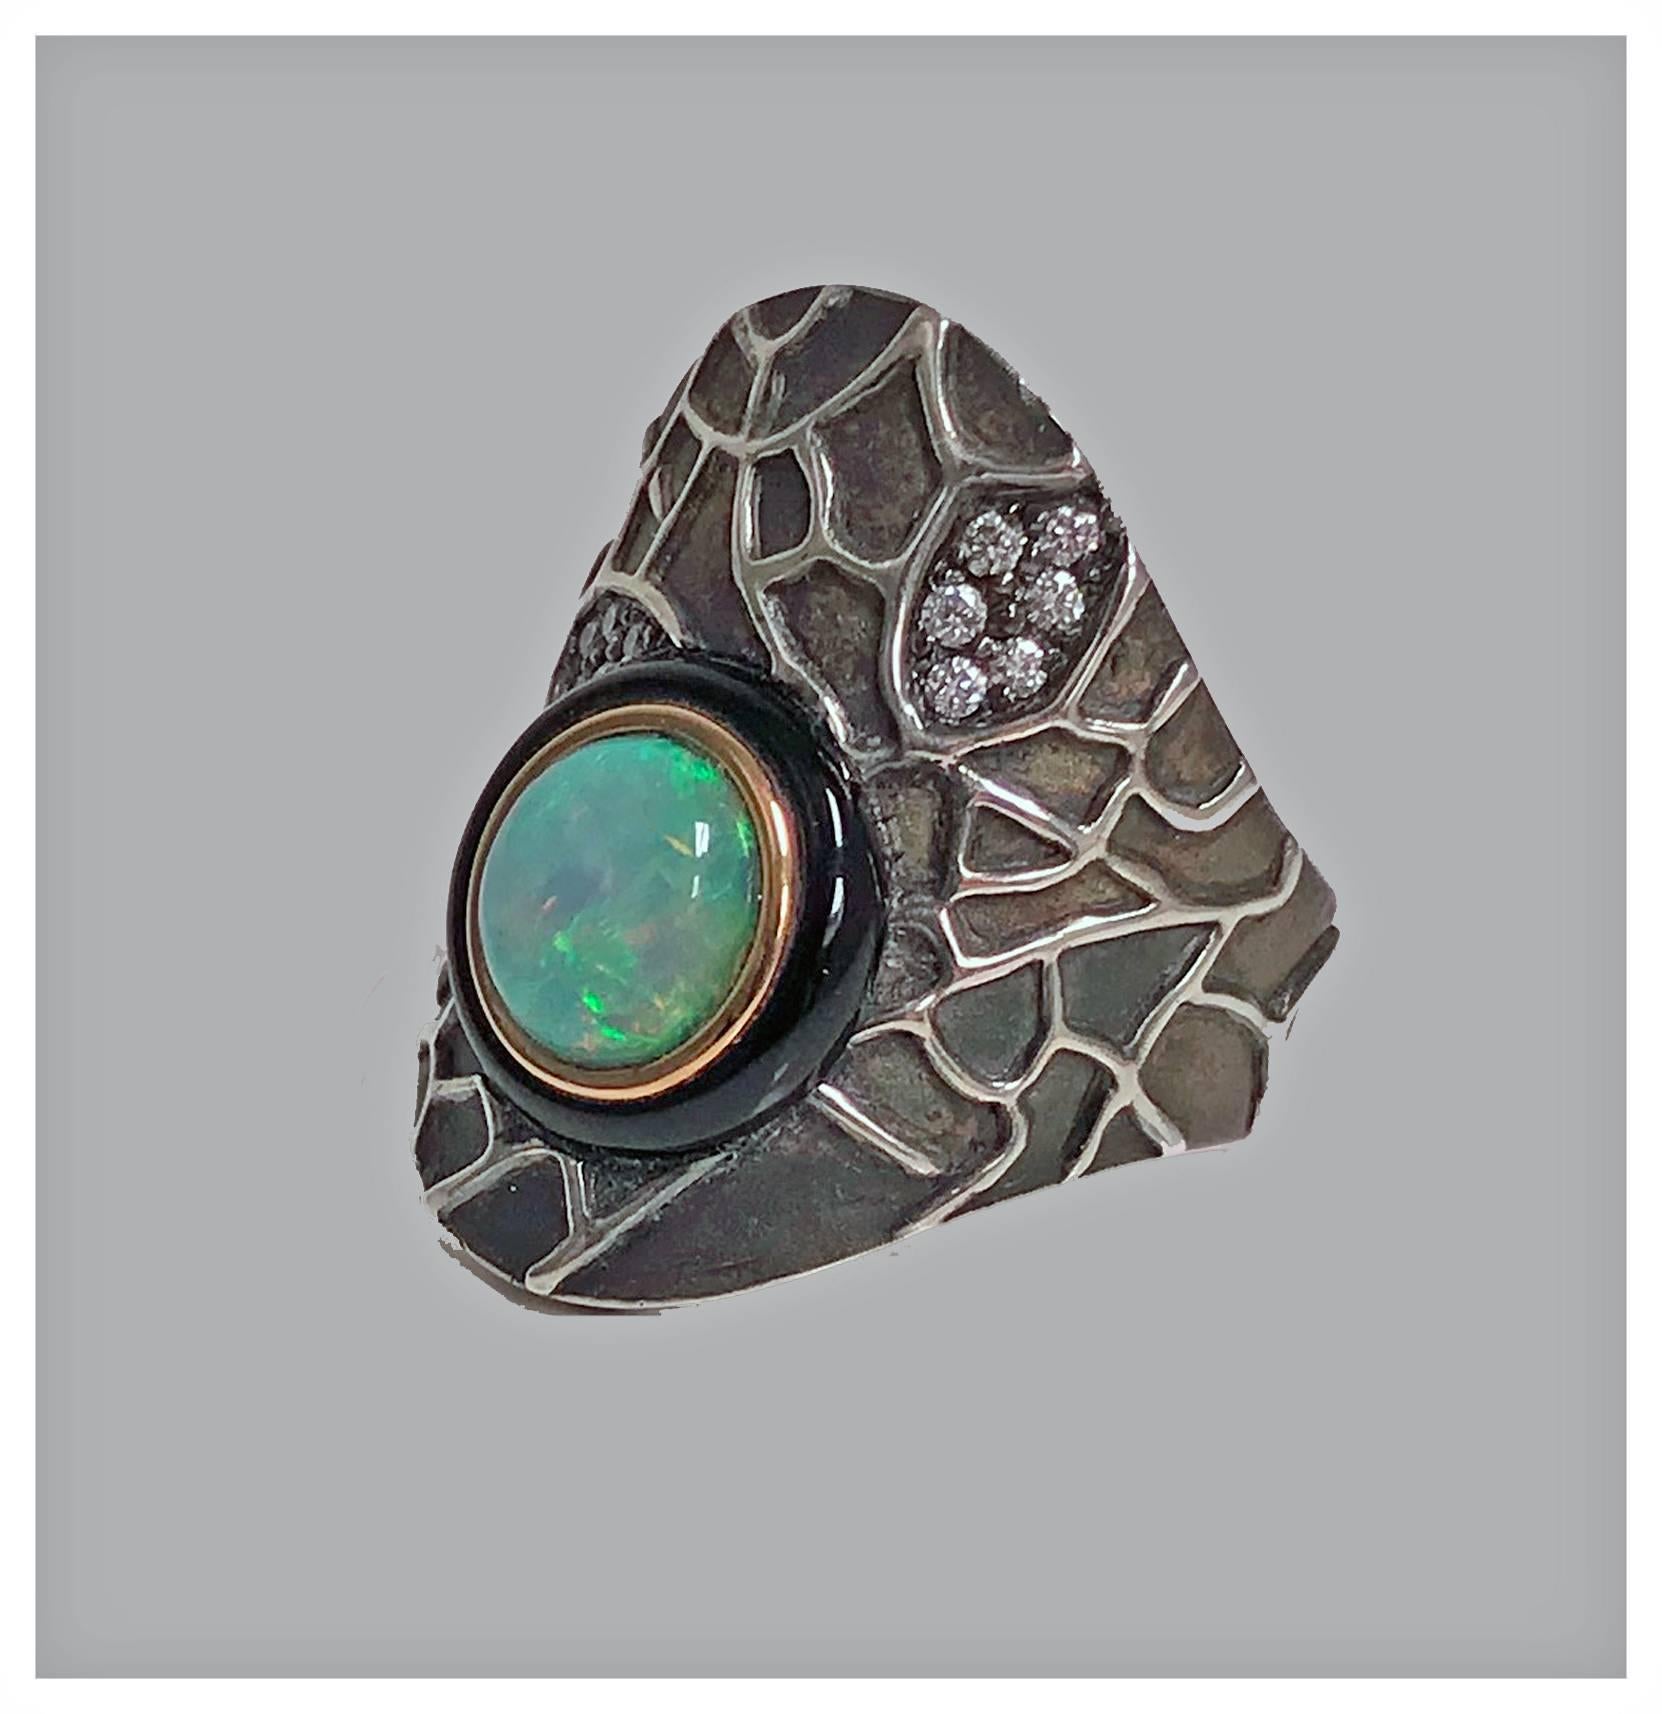 Diamond opal onyx silver and gold ring, 20th century. The of an asymmetrical shape, 18-karat gold bezel offset with a round opal, approximately 8.00 mm, good play of color, with outer black onyx surround. The mount of oxidised silver with applied